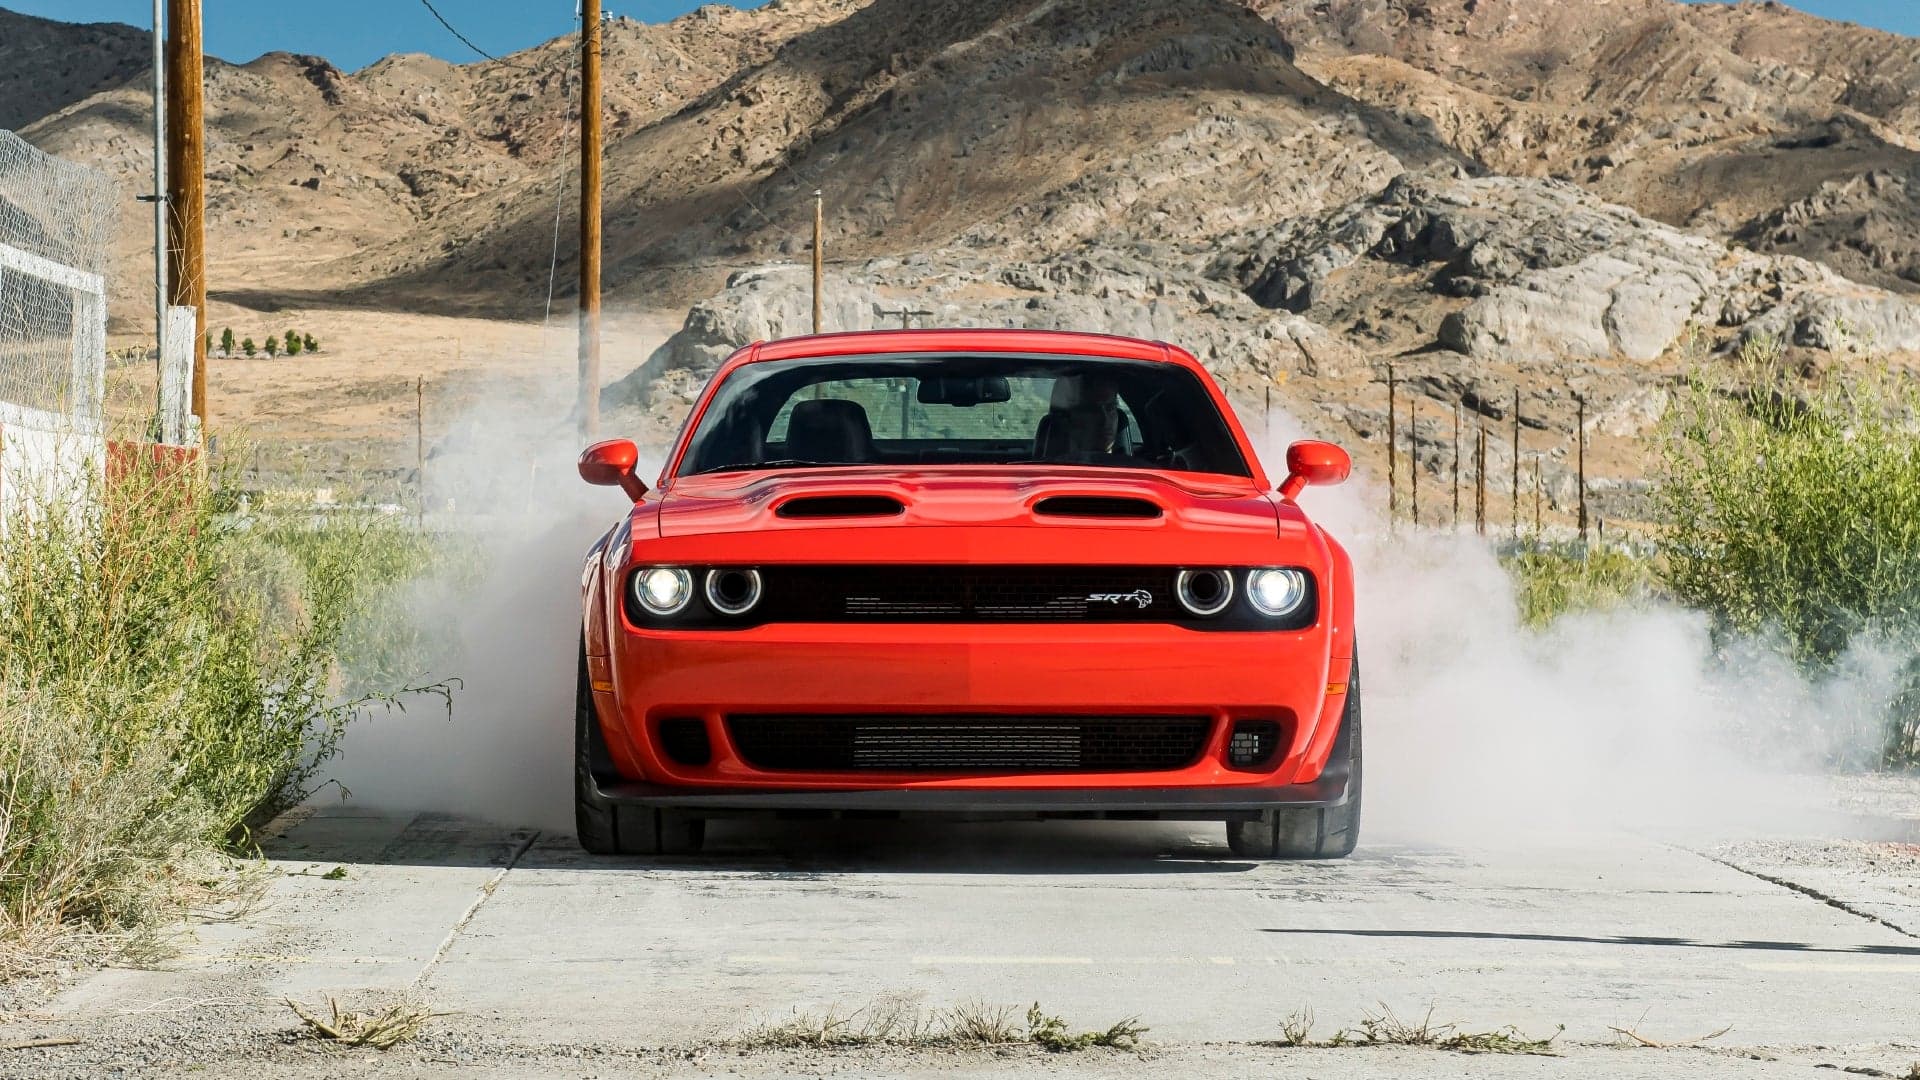 The 2020 Dodge Challenger SRT Super Stock Will Be Way Rarer Than the Demon: Report